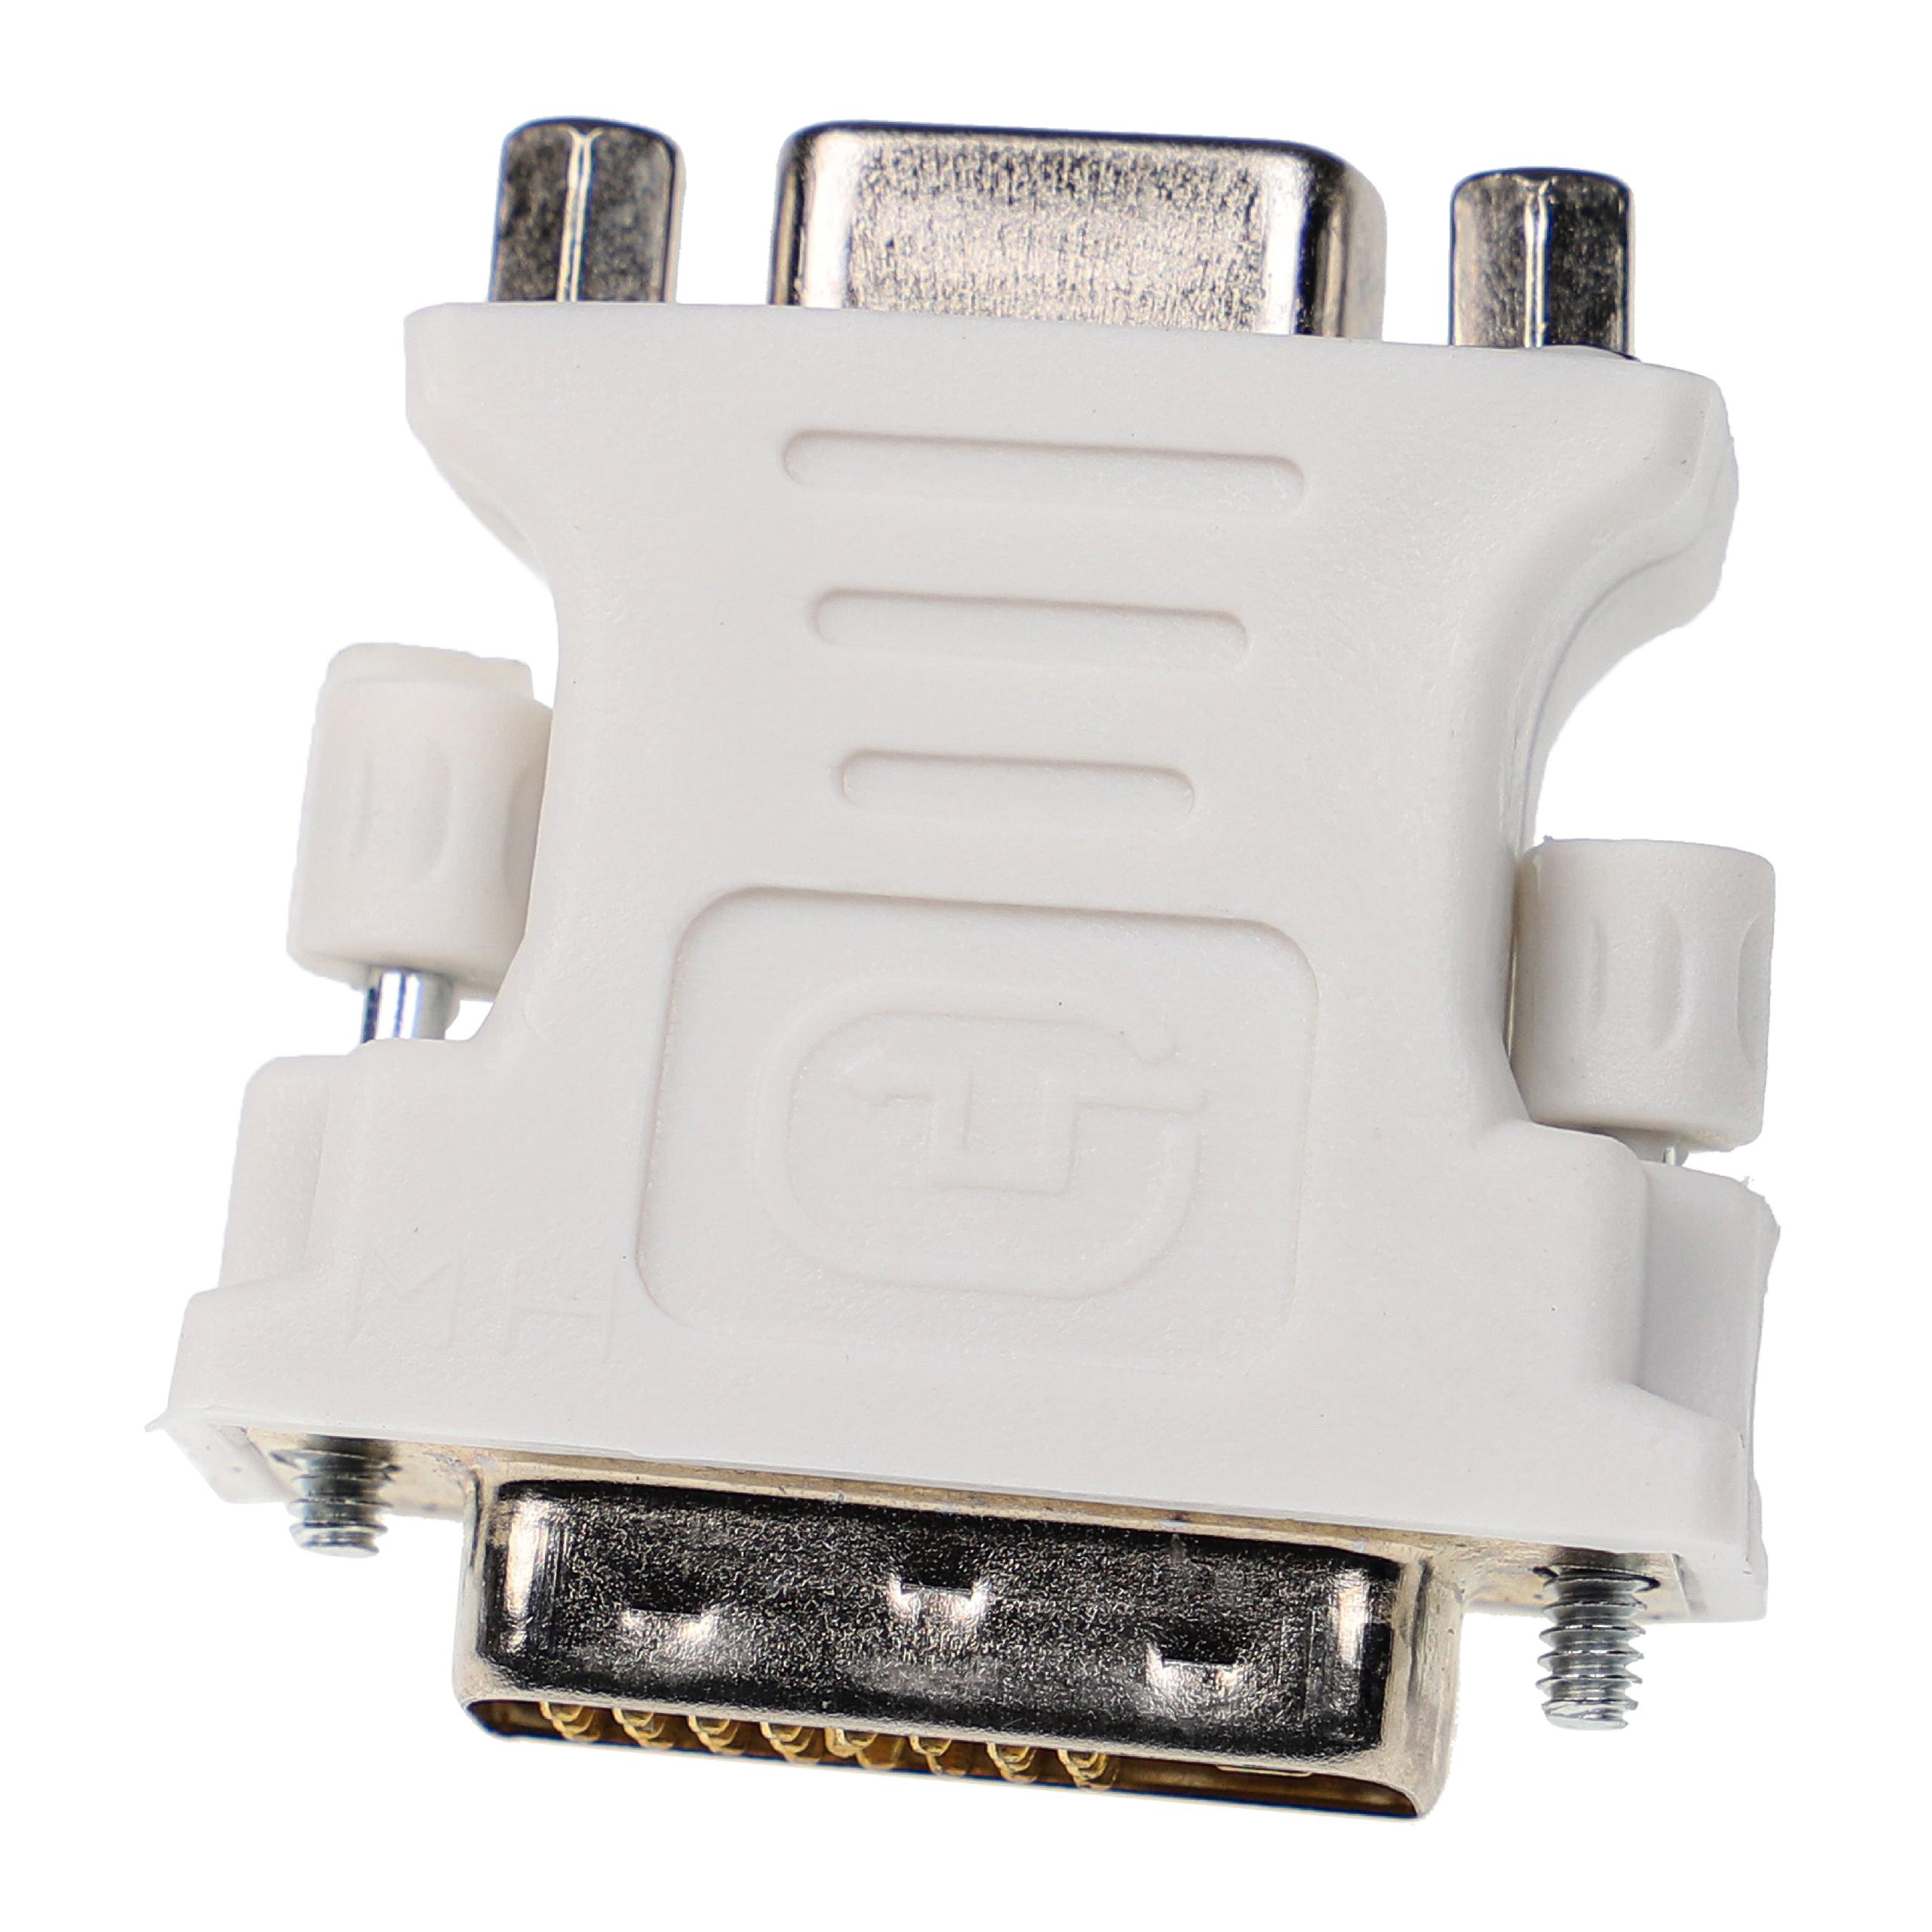 vhbw DVI Plug to VGA Socket Adapter for Connecting DVI Systems to VGA Appliances - Adapter Cable Grey